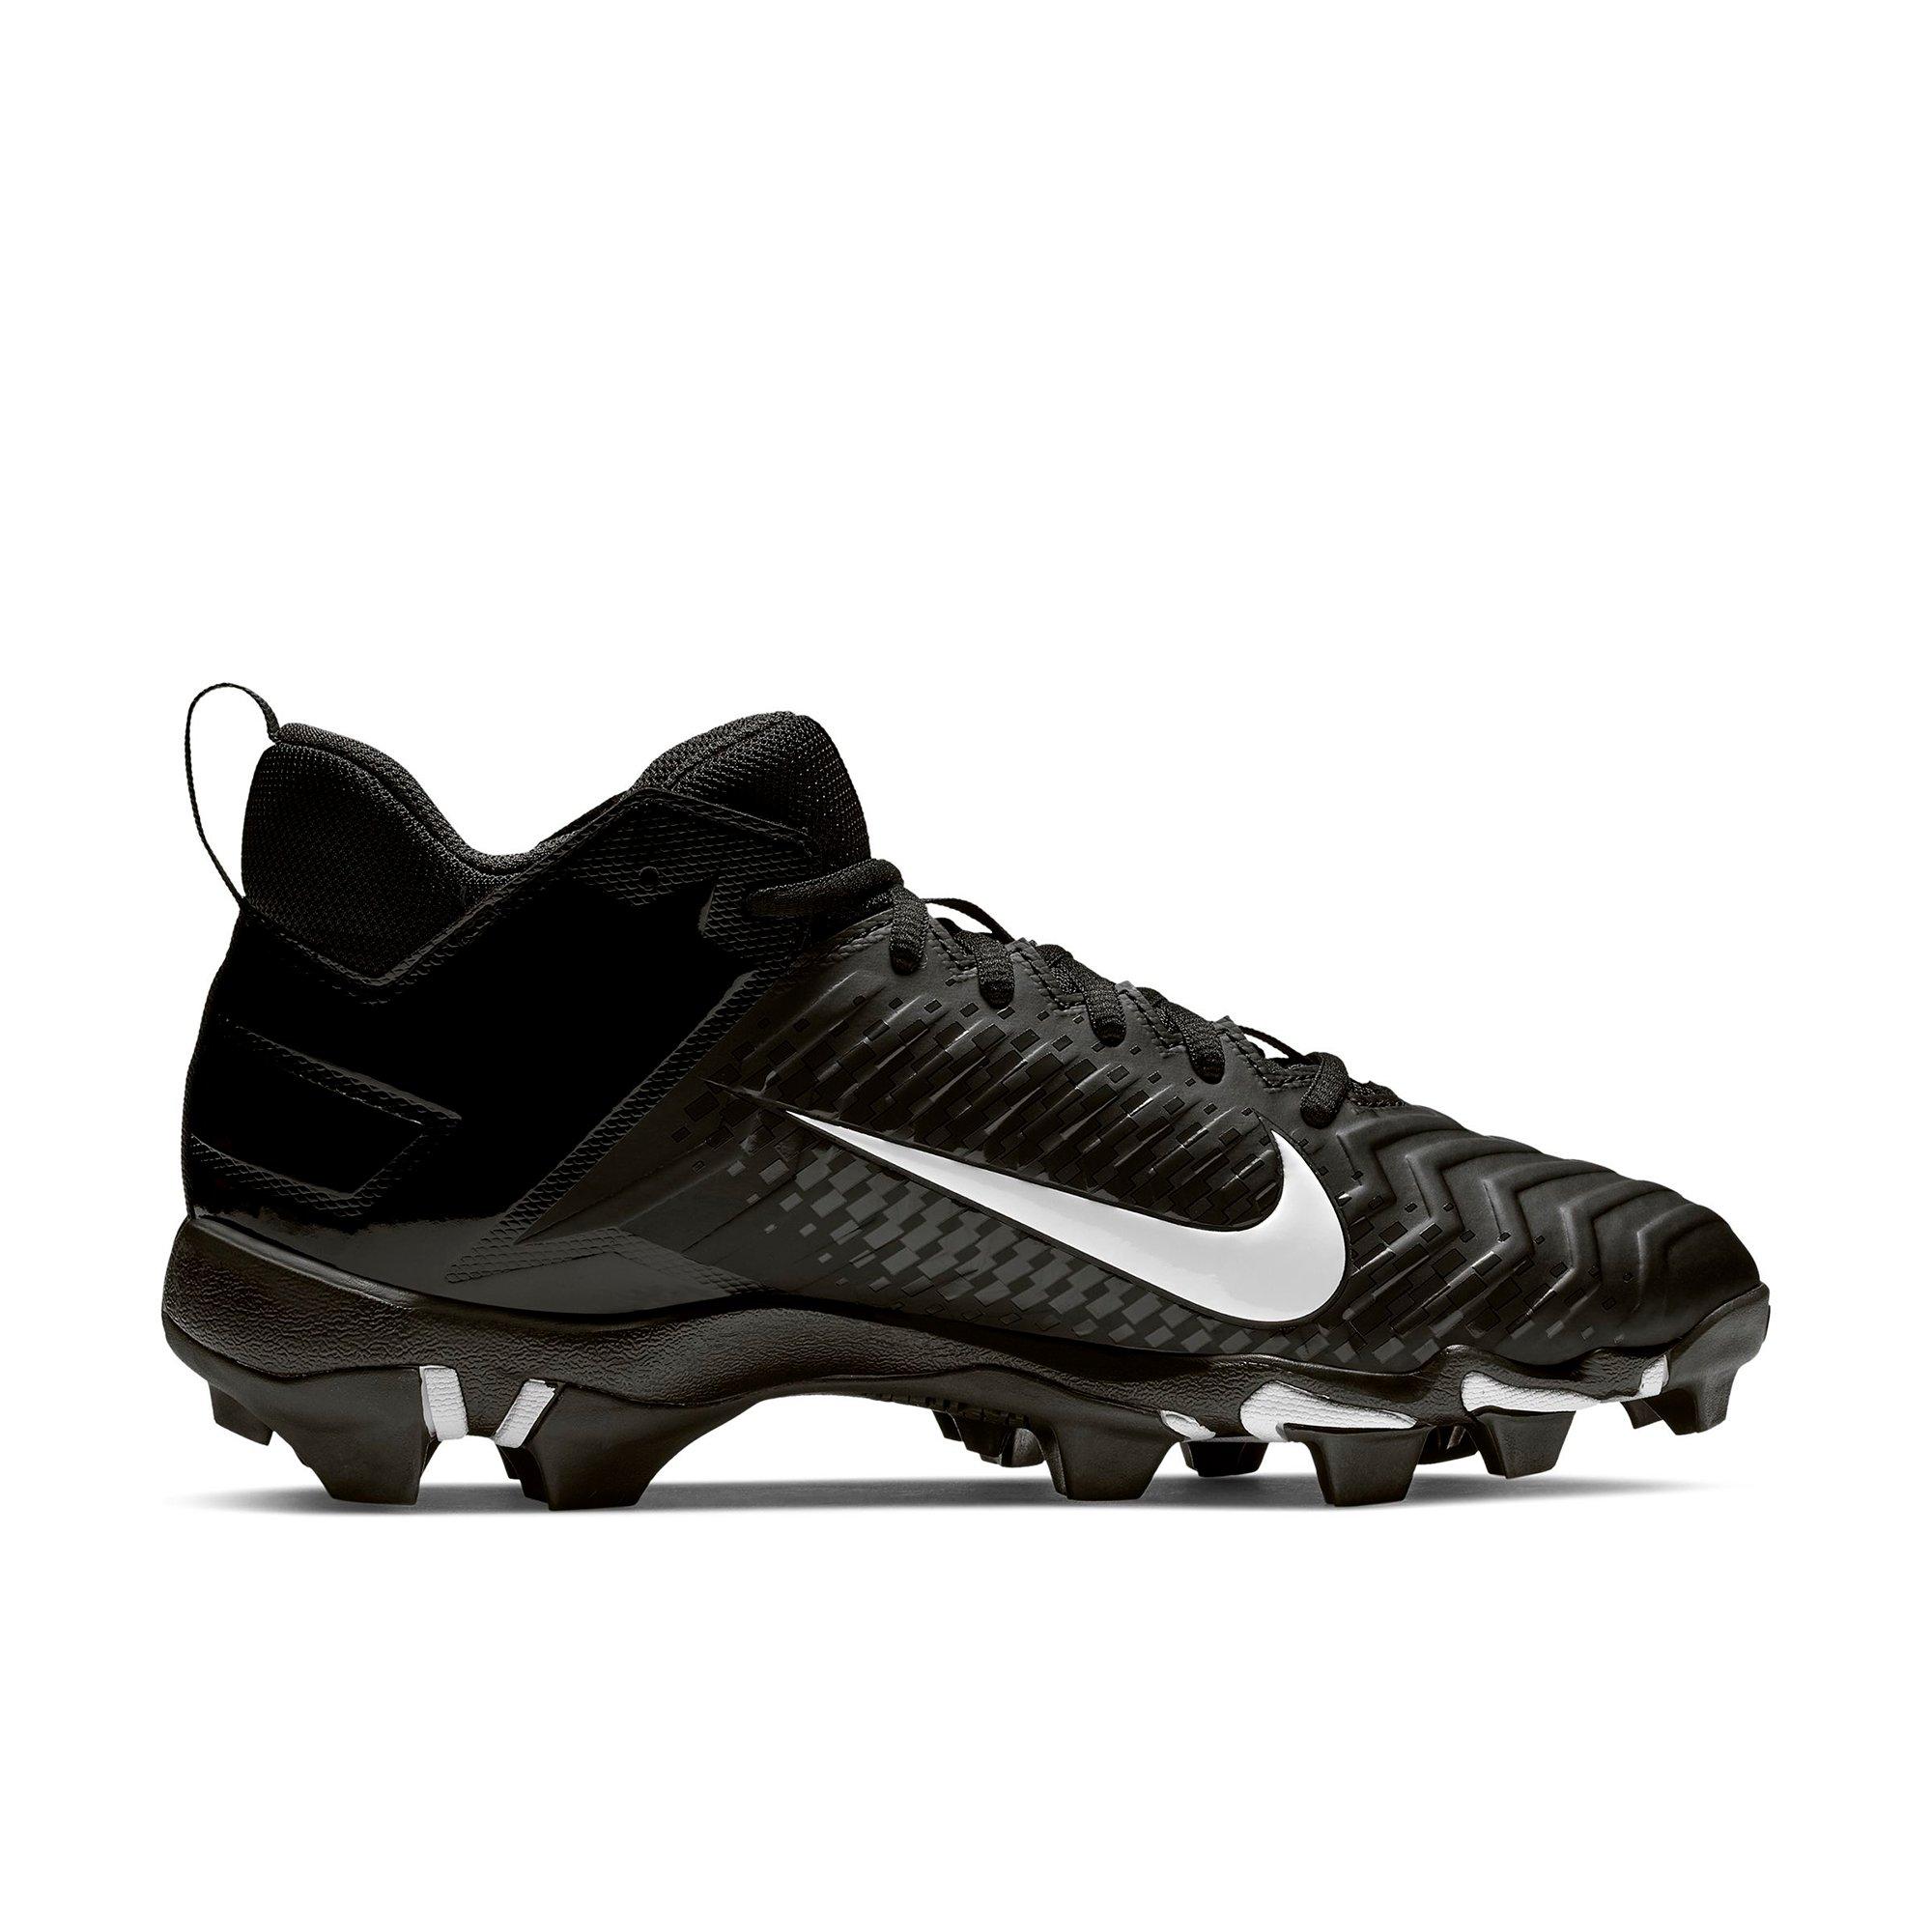 size 12 wide football cleats